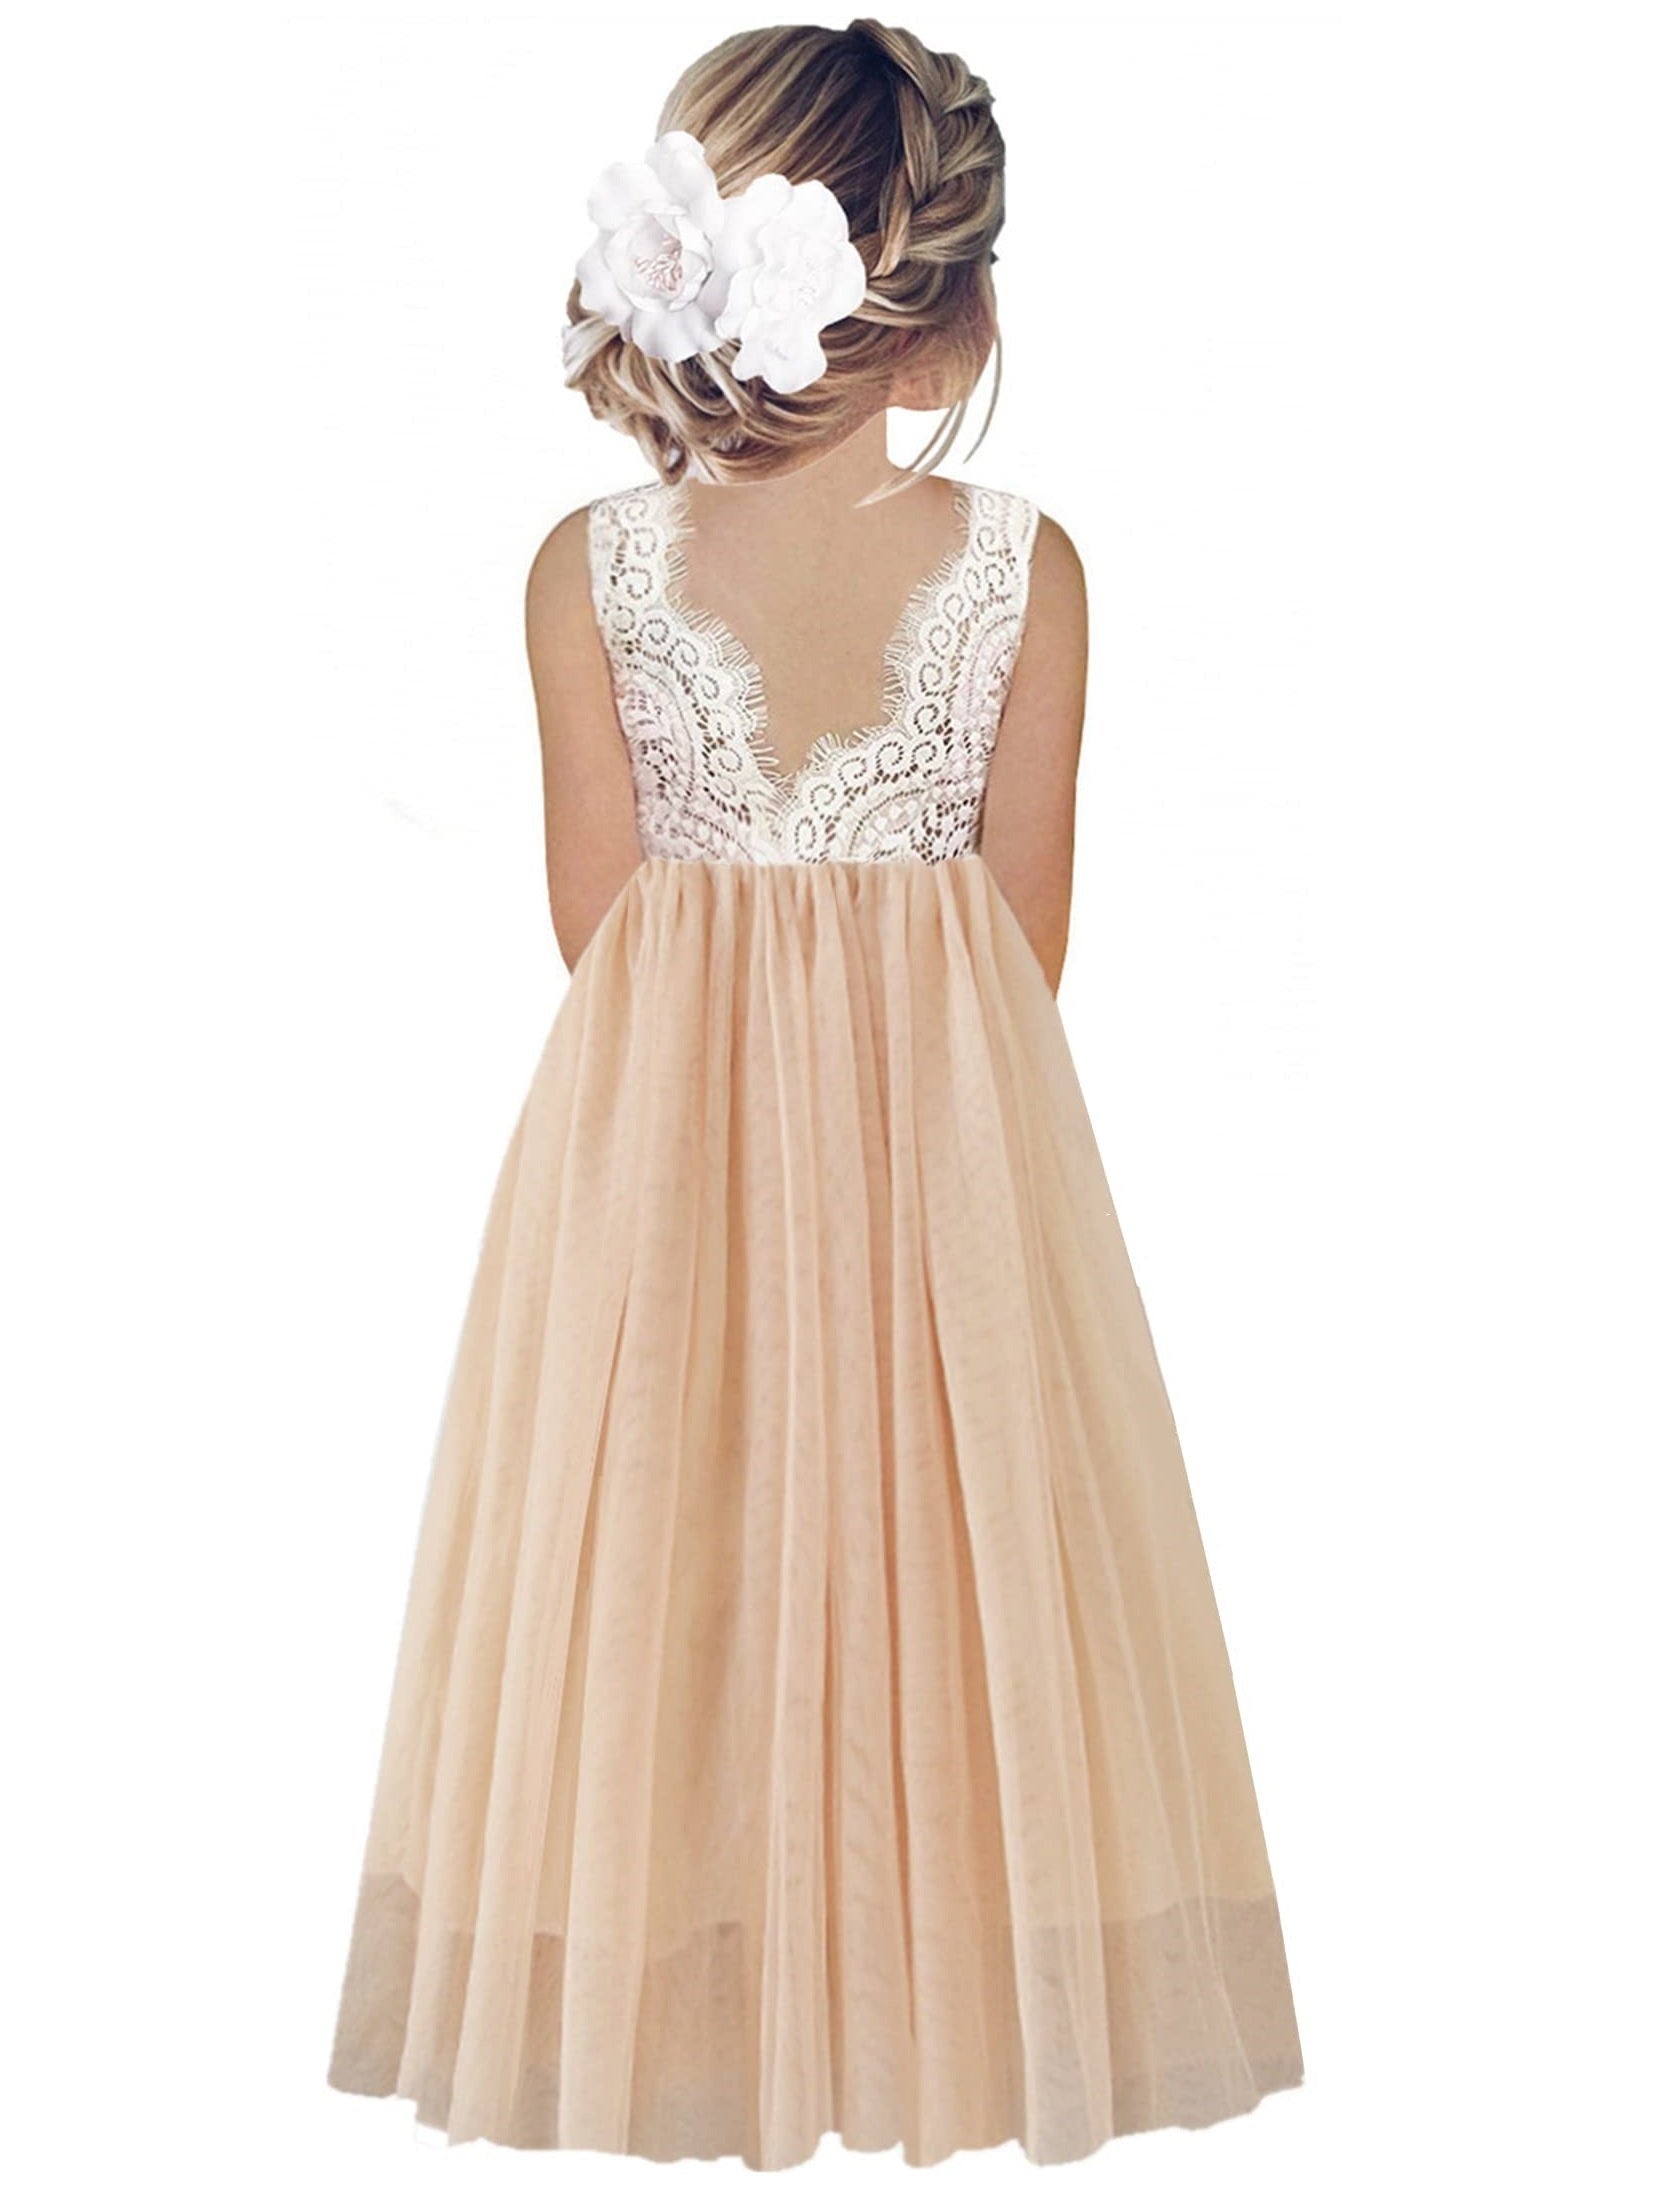 Peony Lace Flower Girl Dress in Champagne Sleeveless Floor-Length Tulle A-Line V-Back Scoop